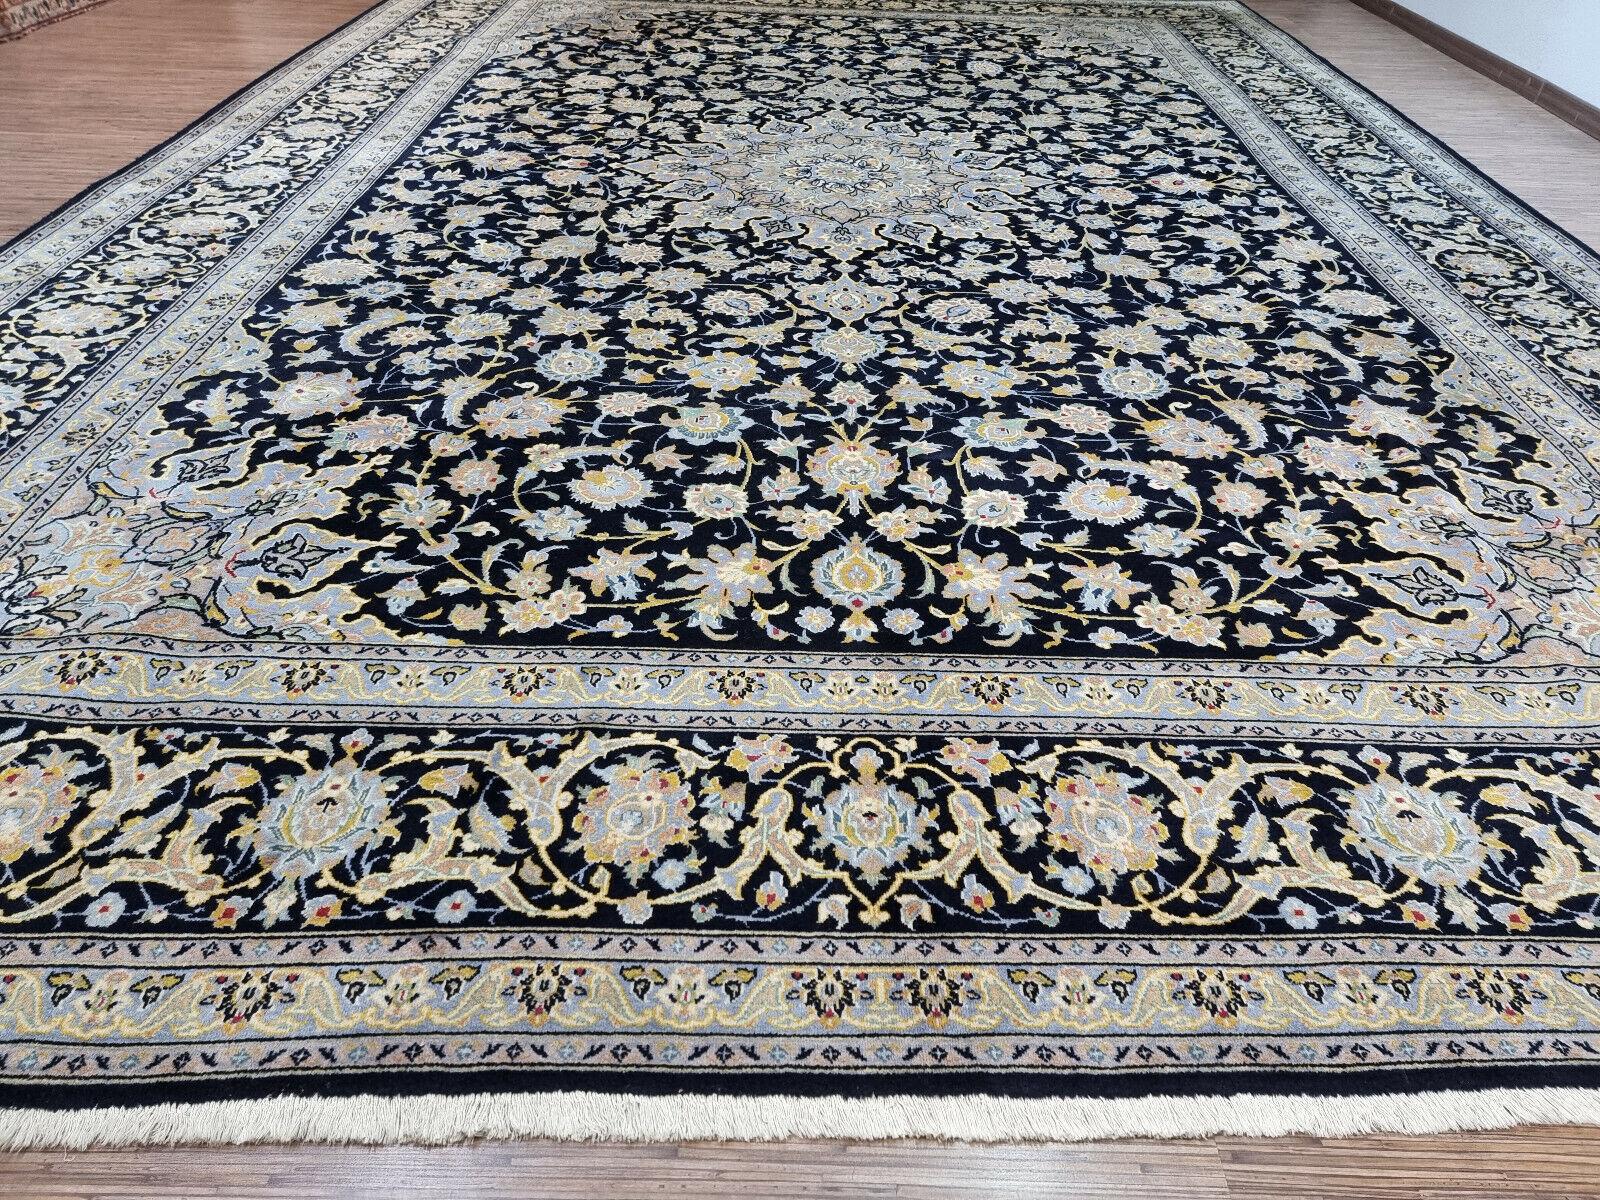 Hand-Knotted Handmade Vintage Persian Style Kashan Oversize Rug 10.1' x 14.4', 1970s - 1D69 For Sale